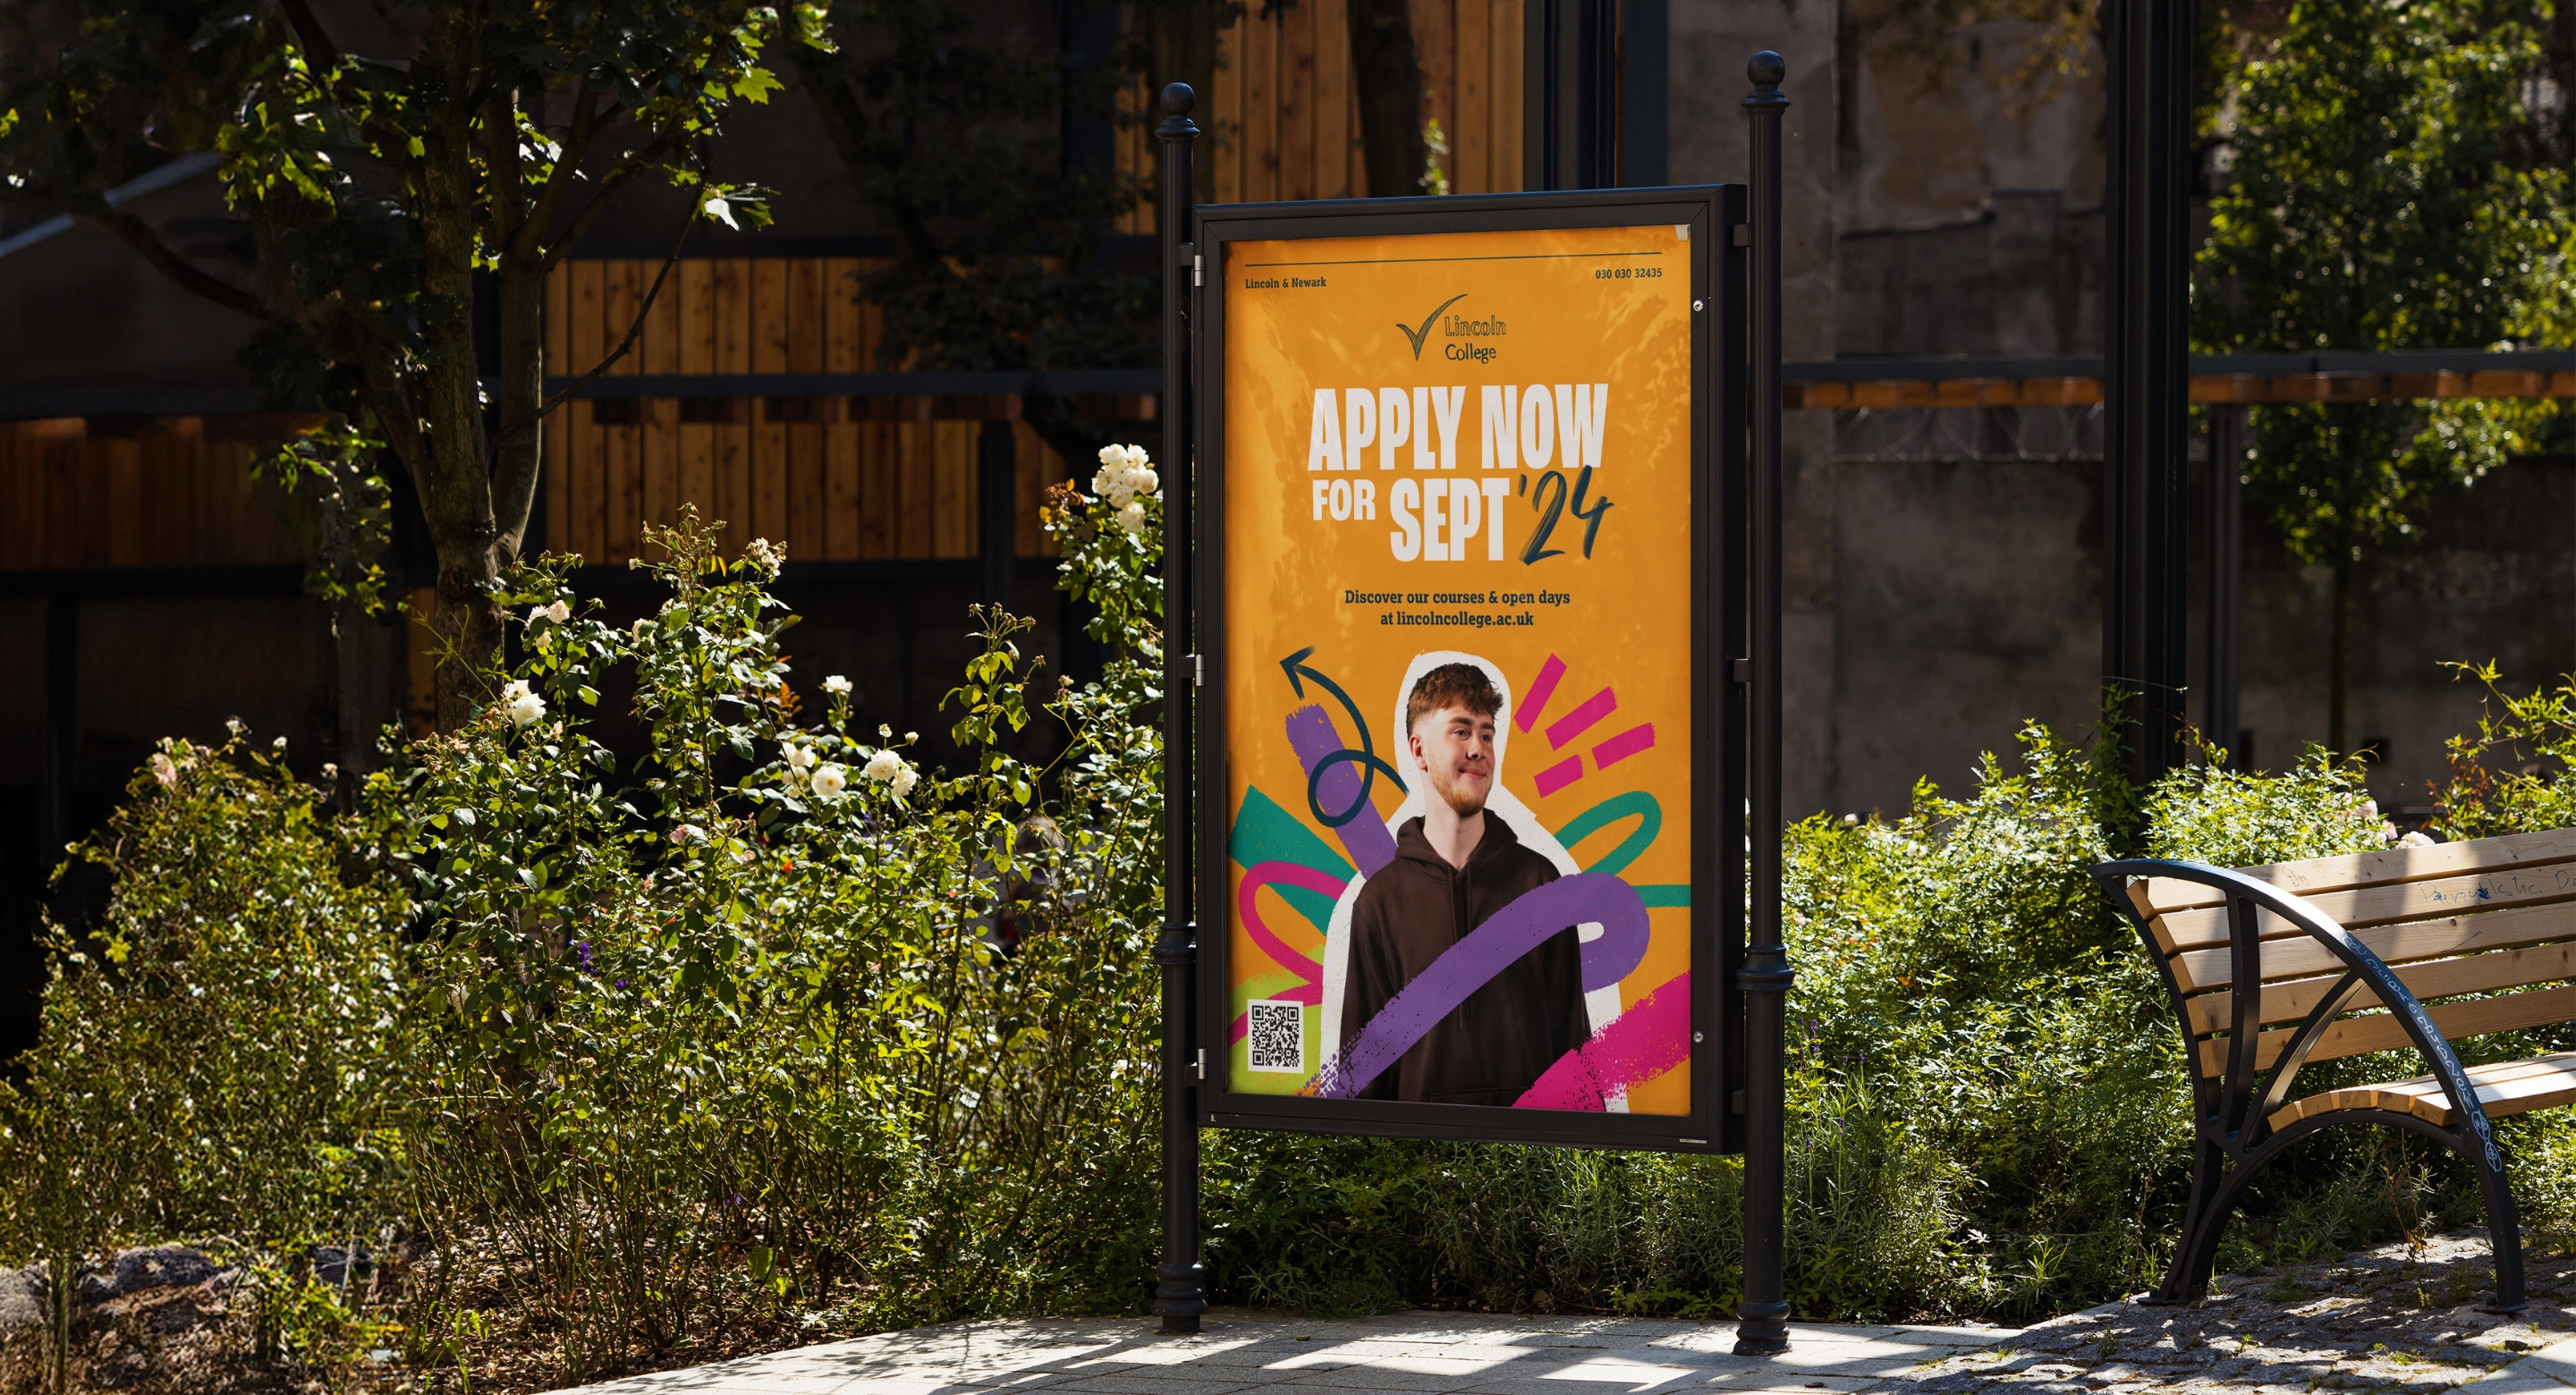 Lincoln College bus stop marketing poster billboard design by Root Studio